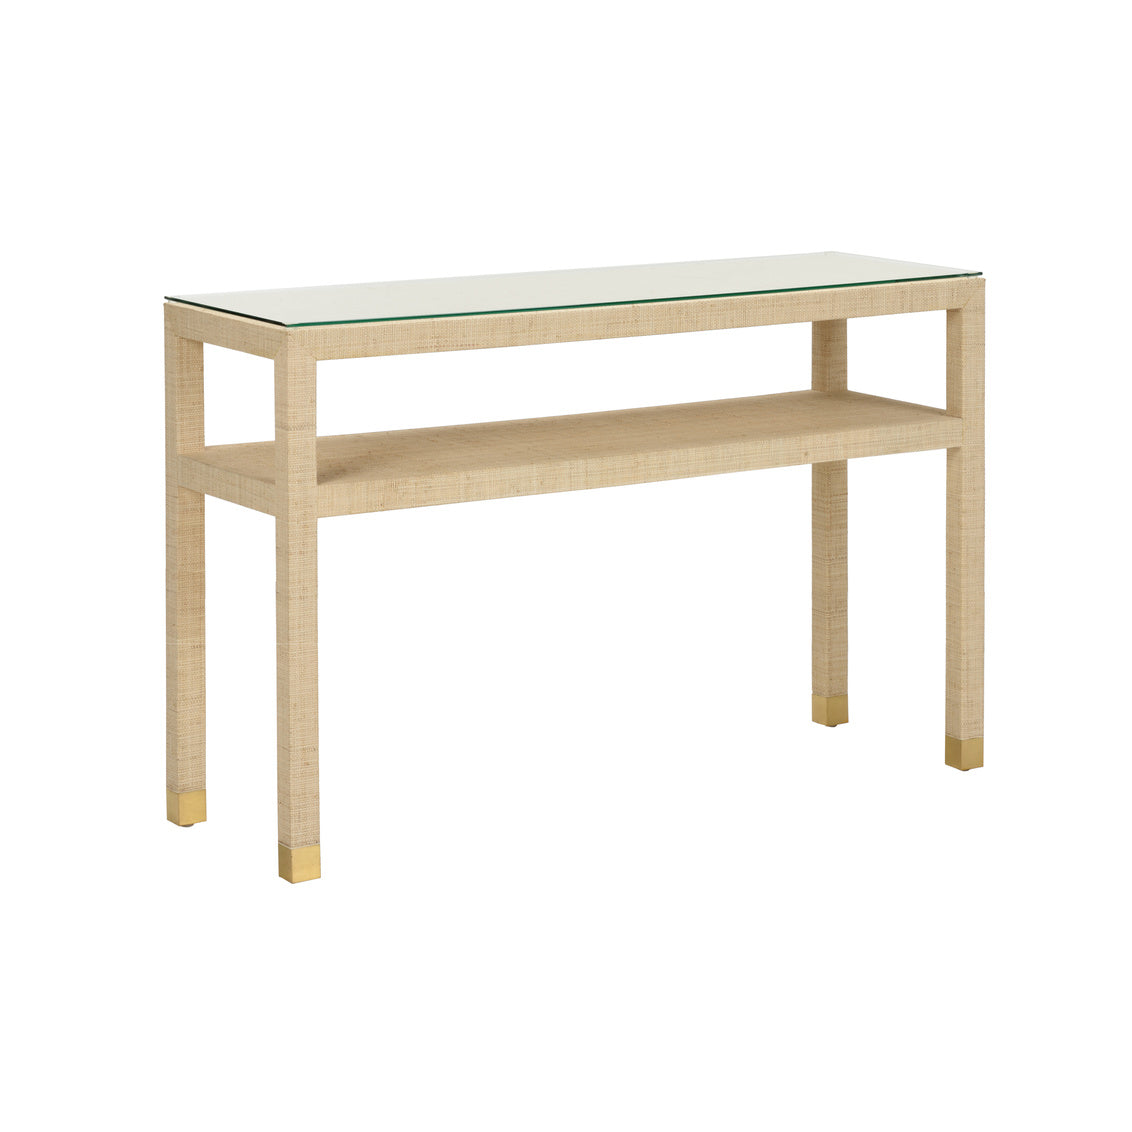 Socialite Console Table - Natural